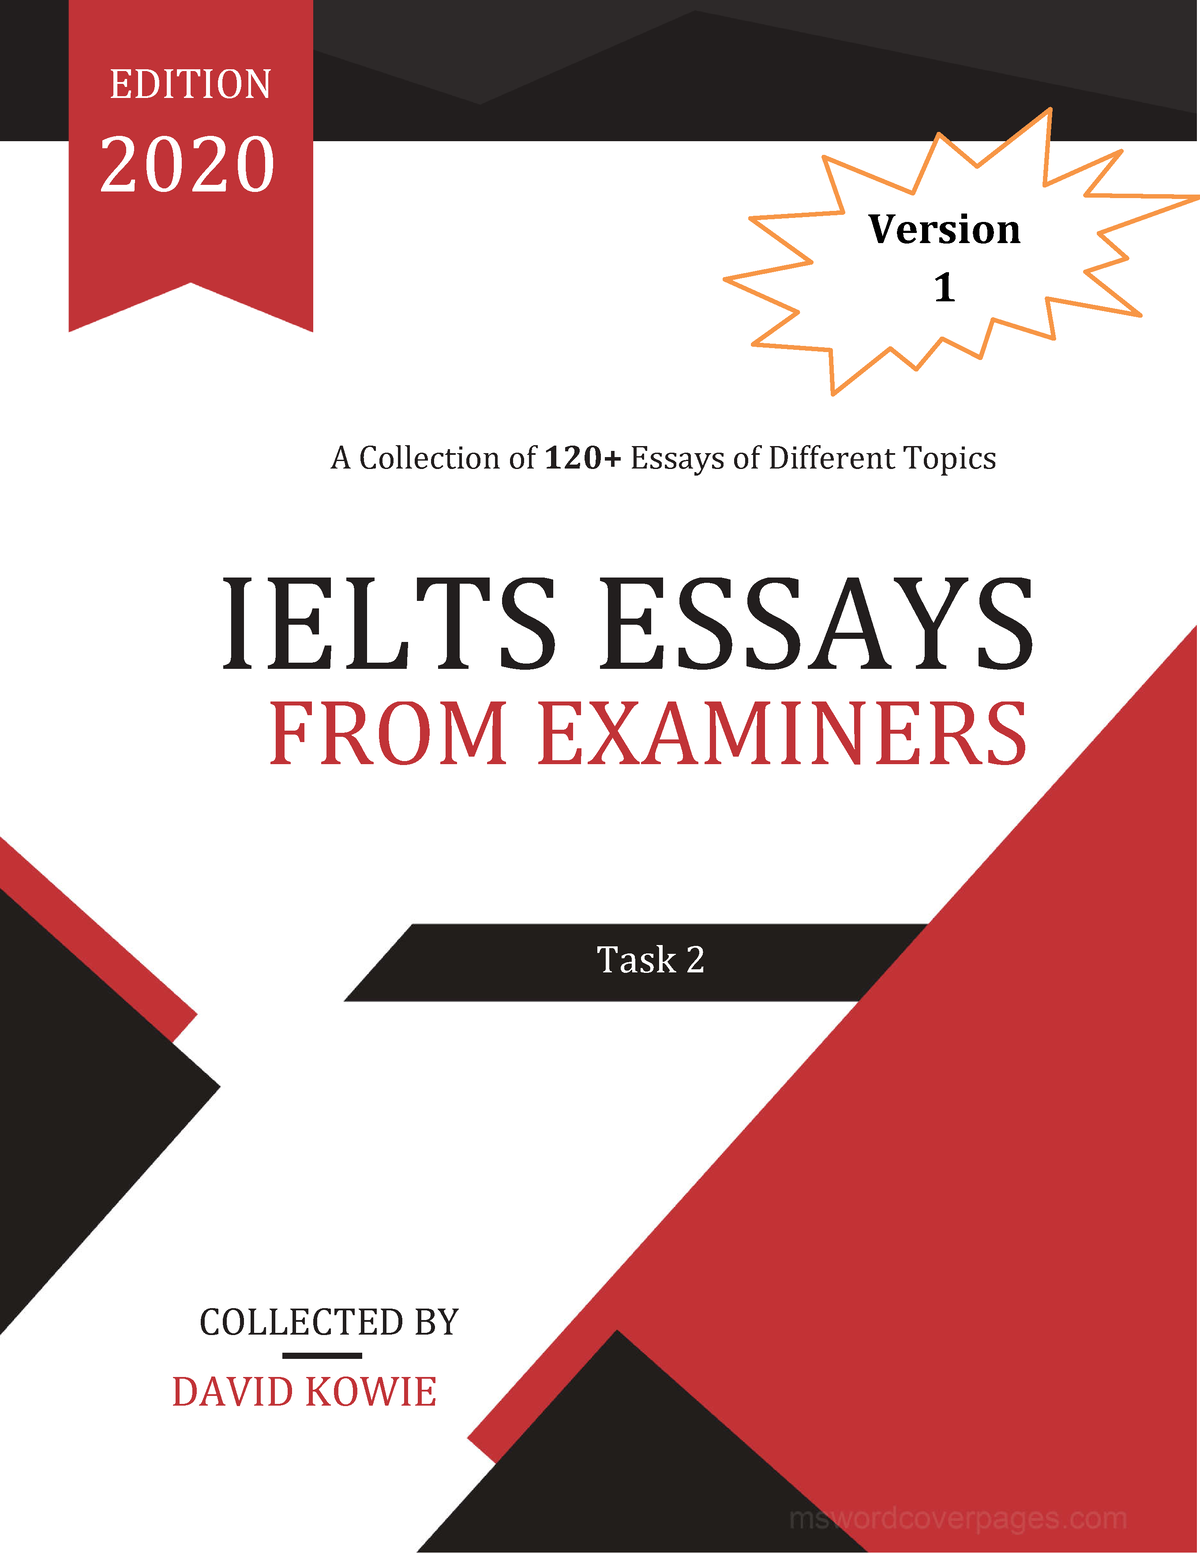 ielts essays from examiners 2020